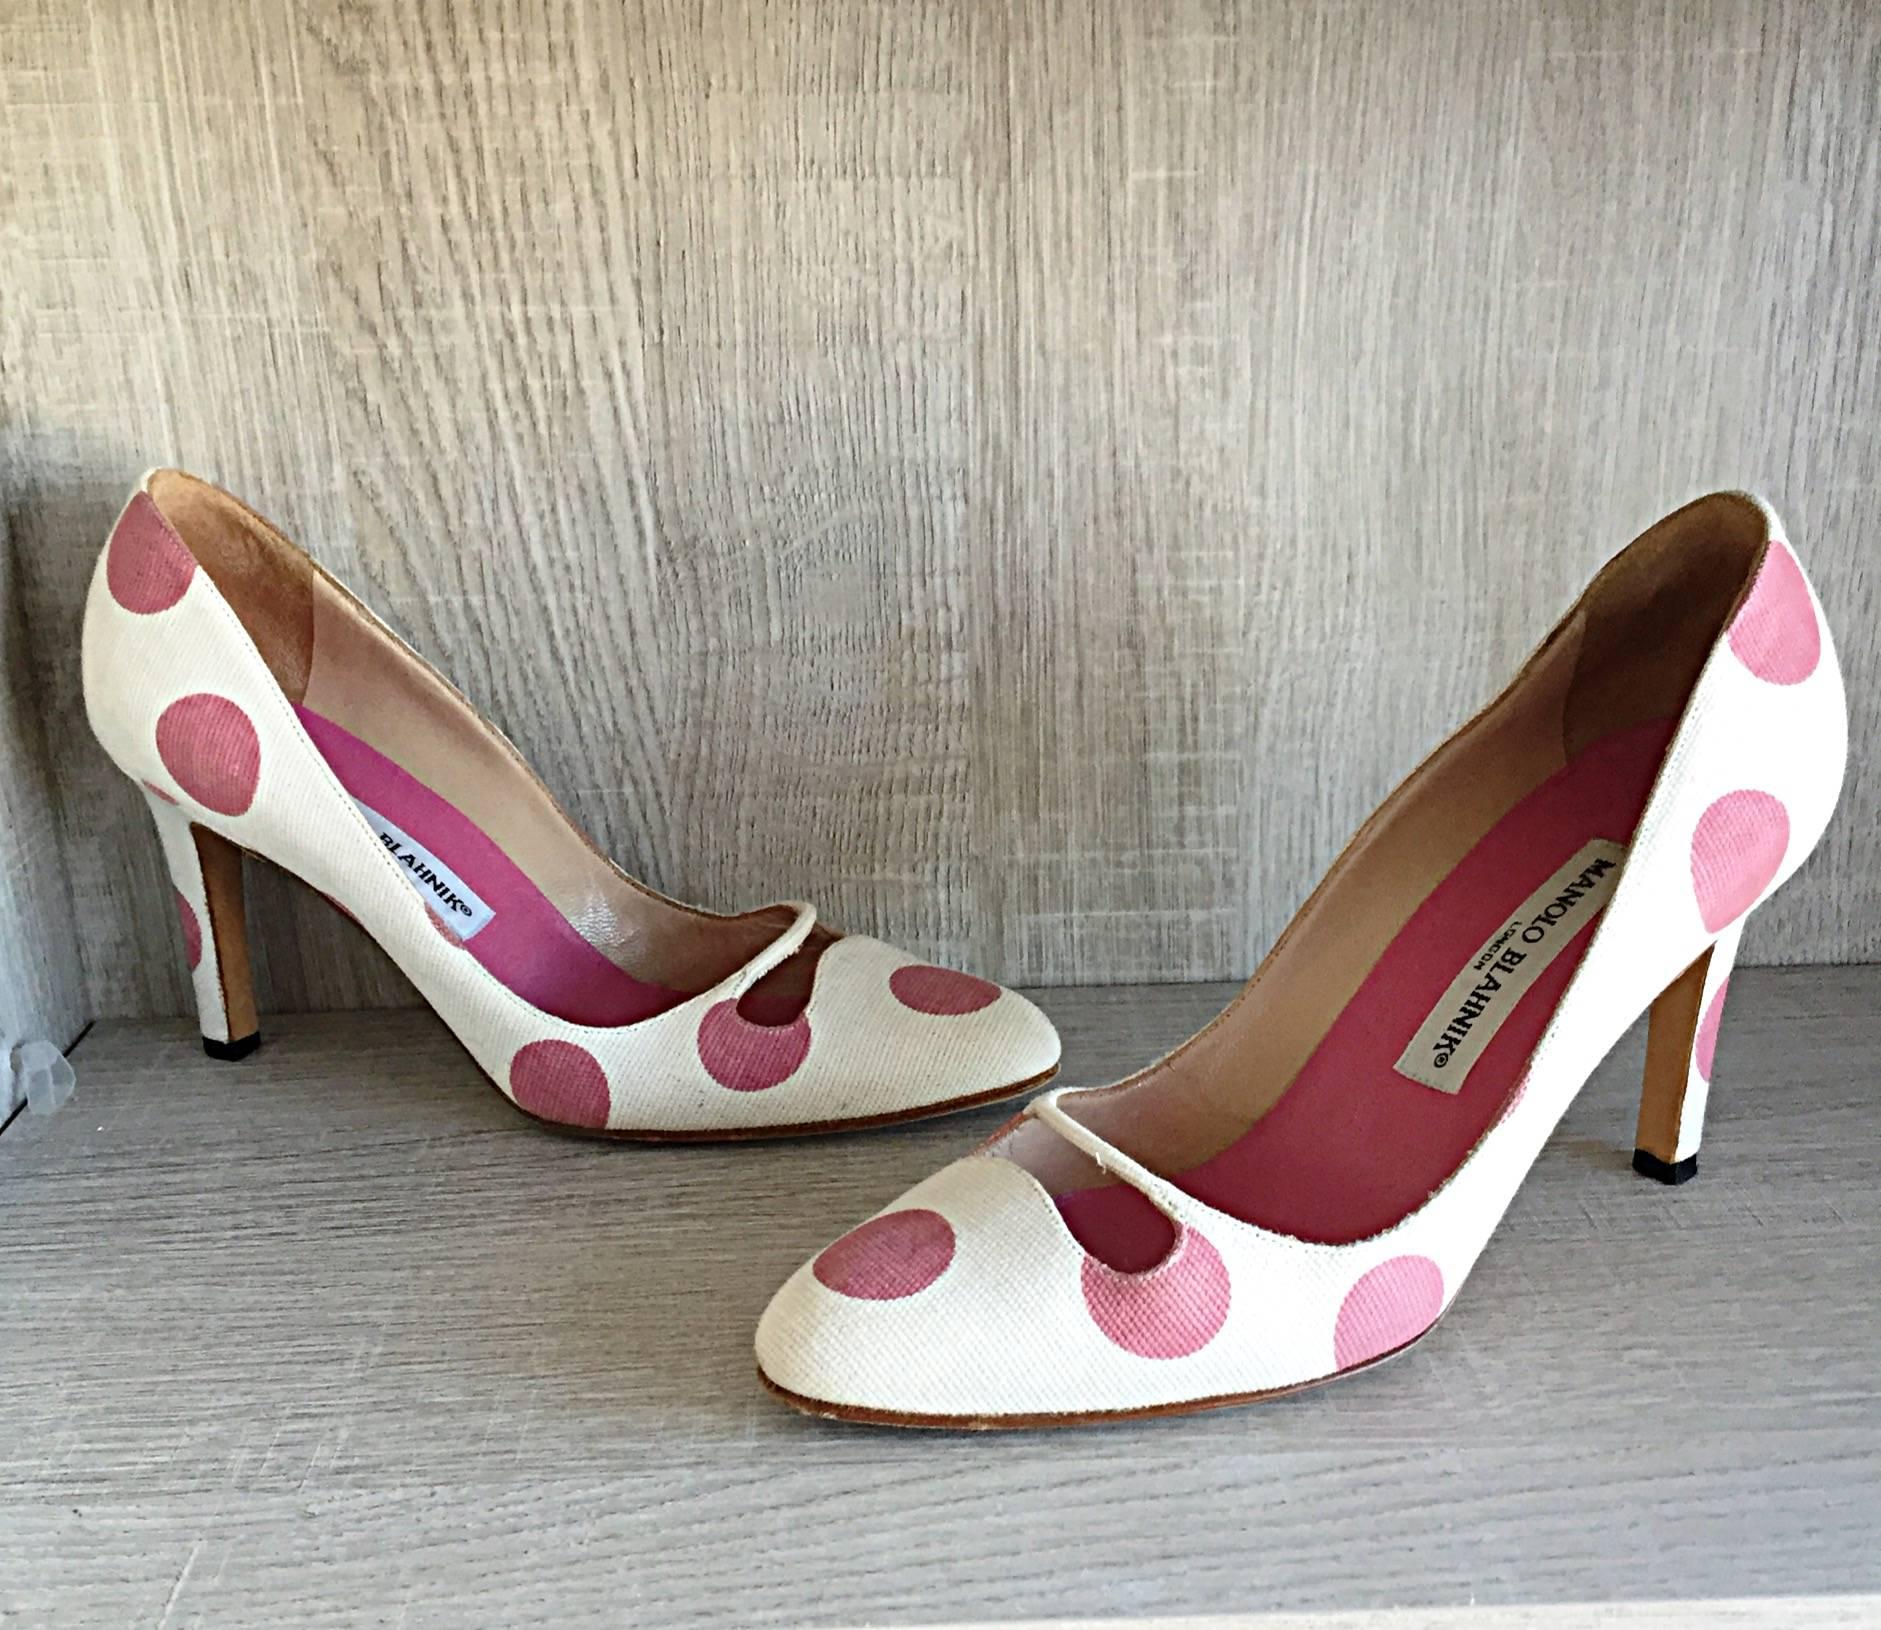 Chic early 2000s MANOLO BLAHNIK pink and white polka dot heels! These shoes look to have been worn once at most--most likely just tried on. Construction on these beauties is nothing less of amazing! Sensible 3 inch heel evokes class and sex appeal.